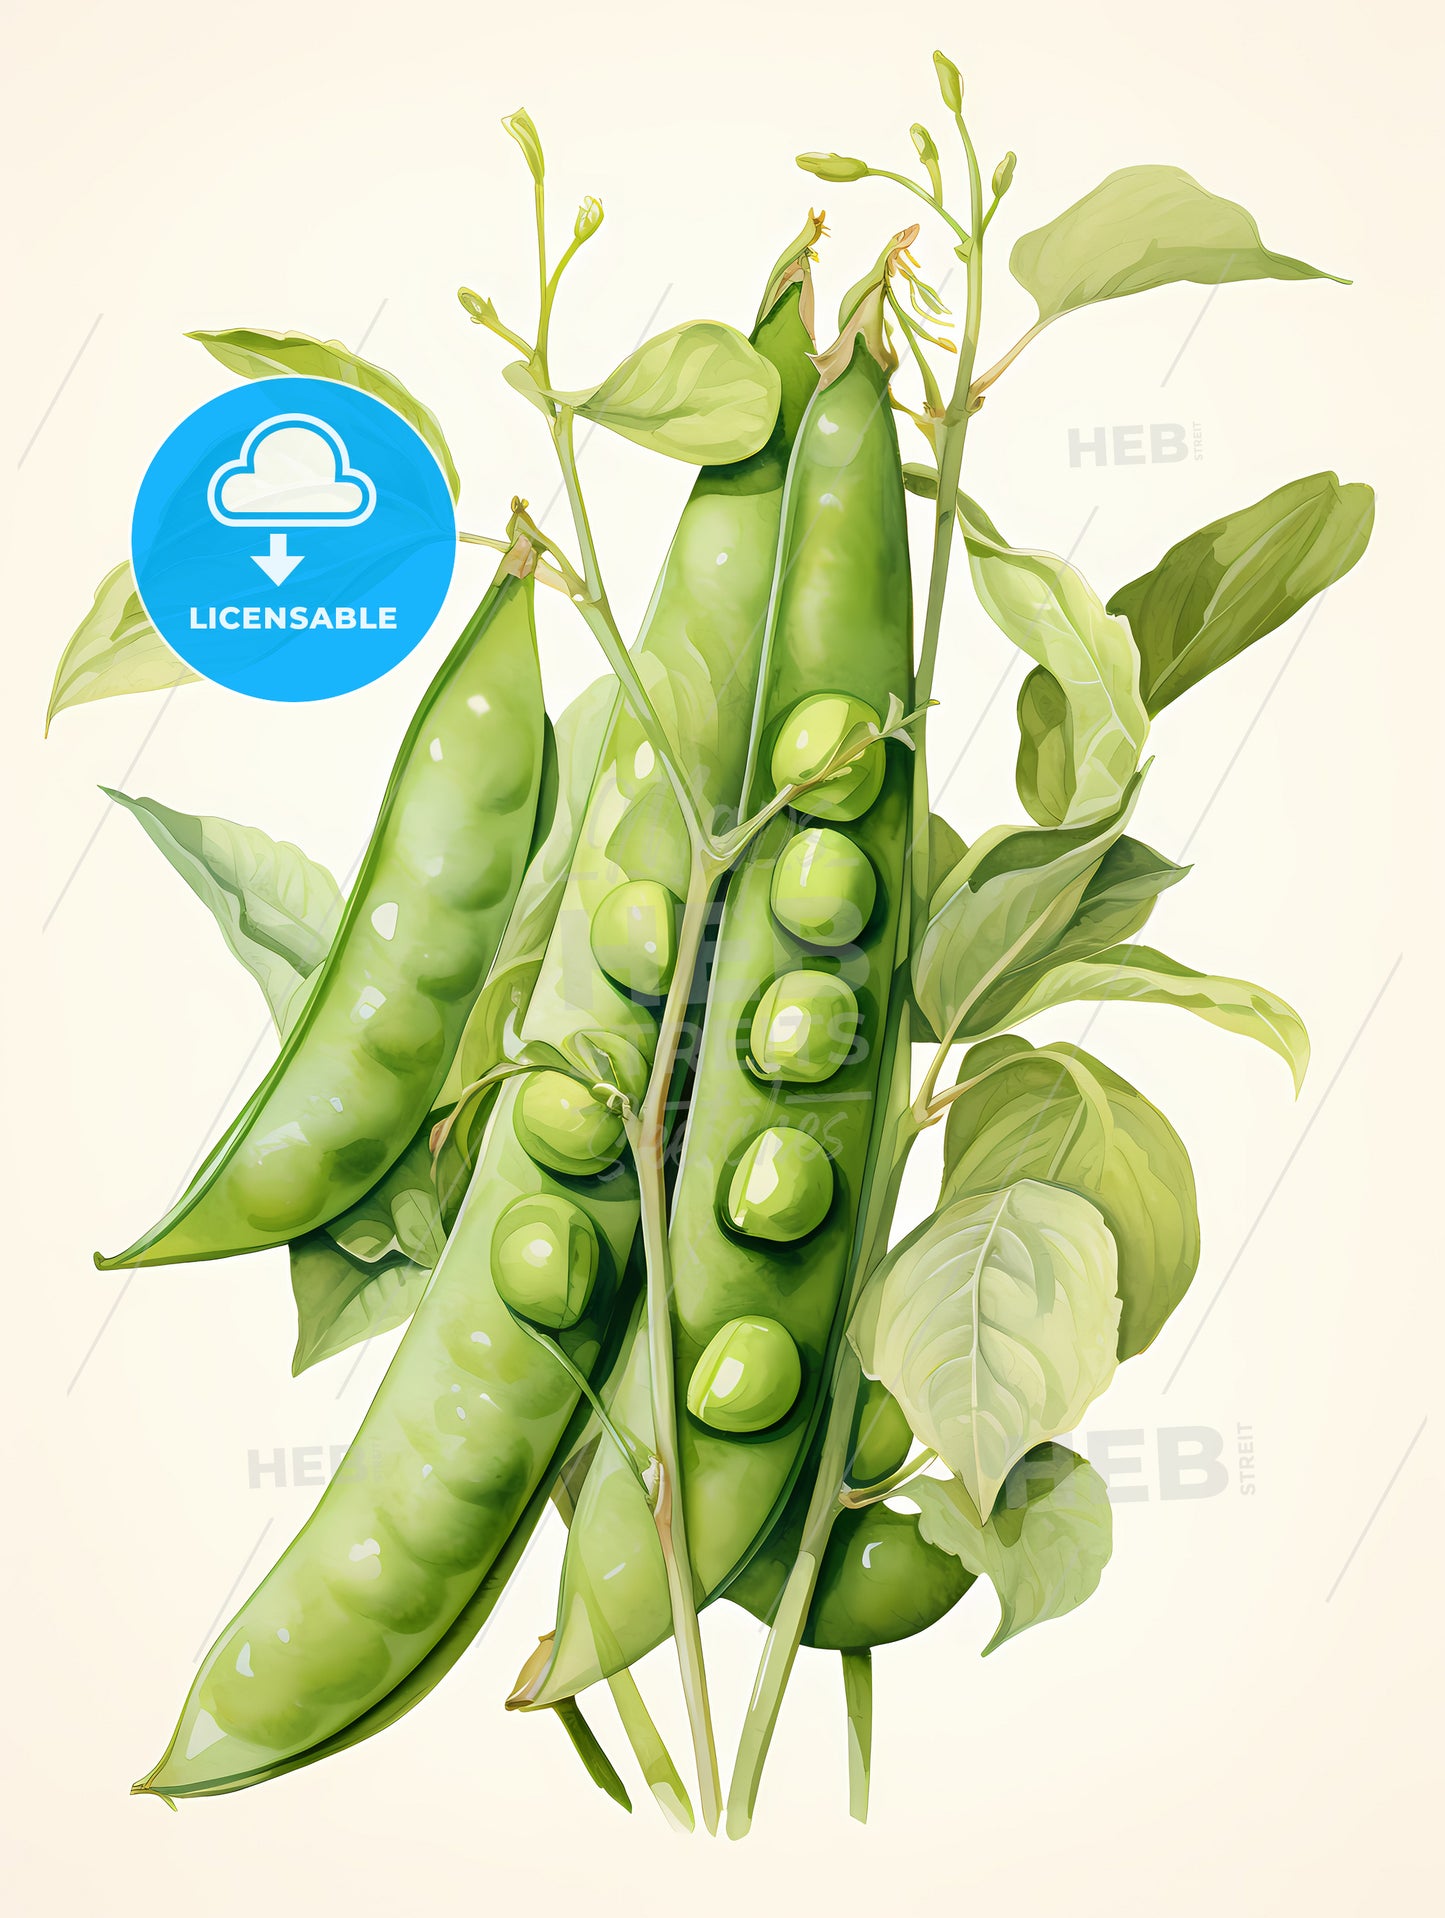 Peas - A Pea Plant With Leaves And Peas